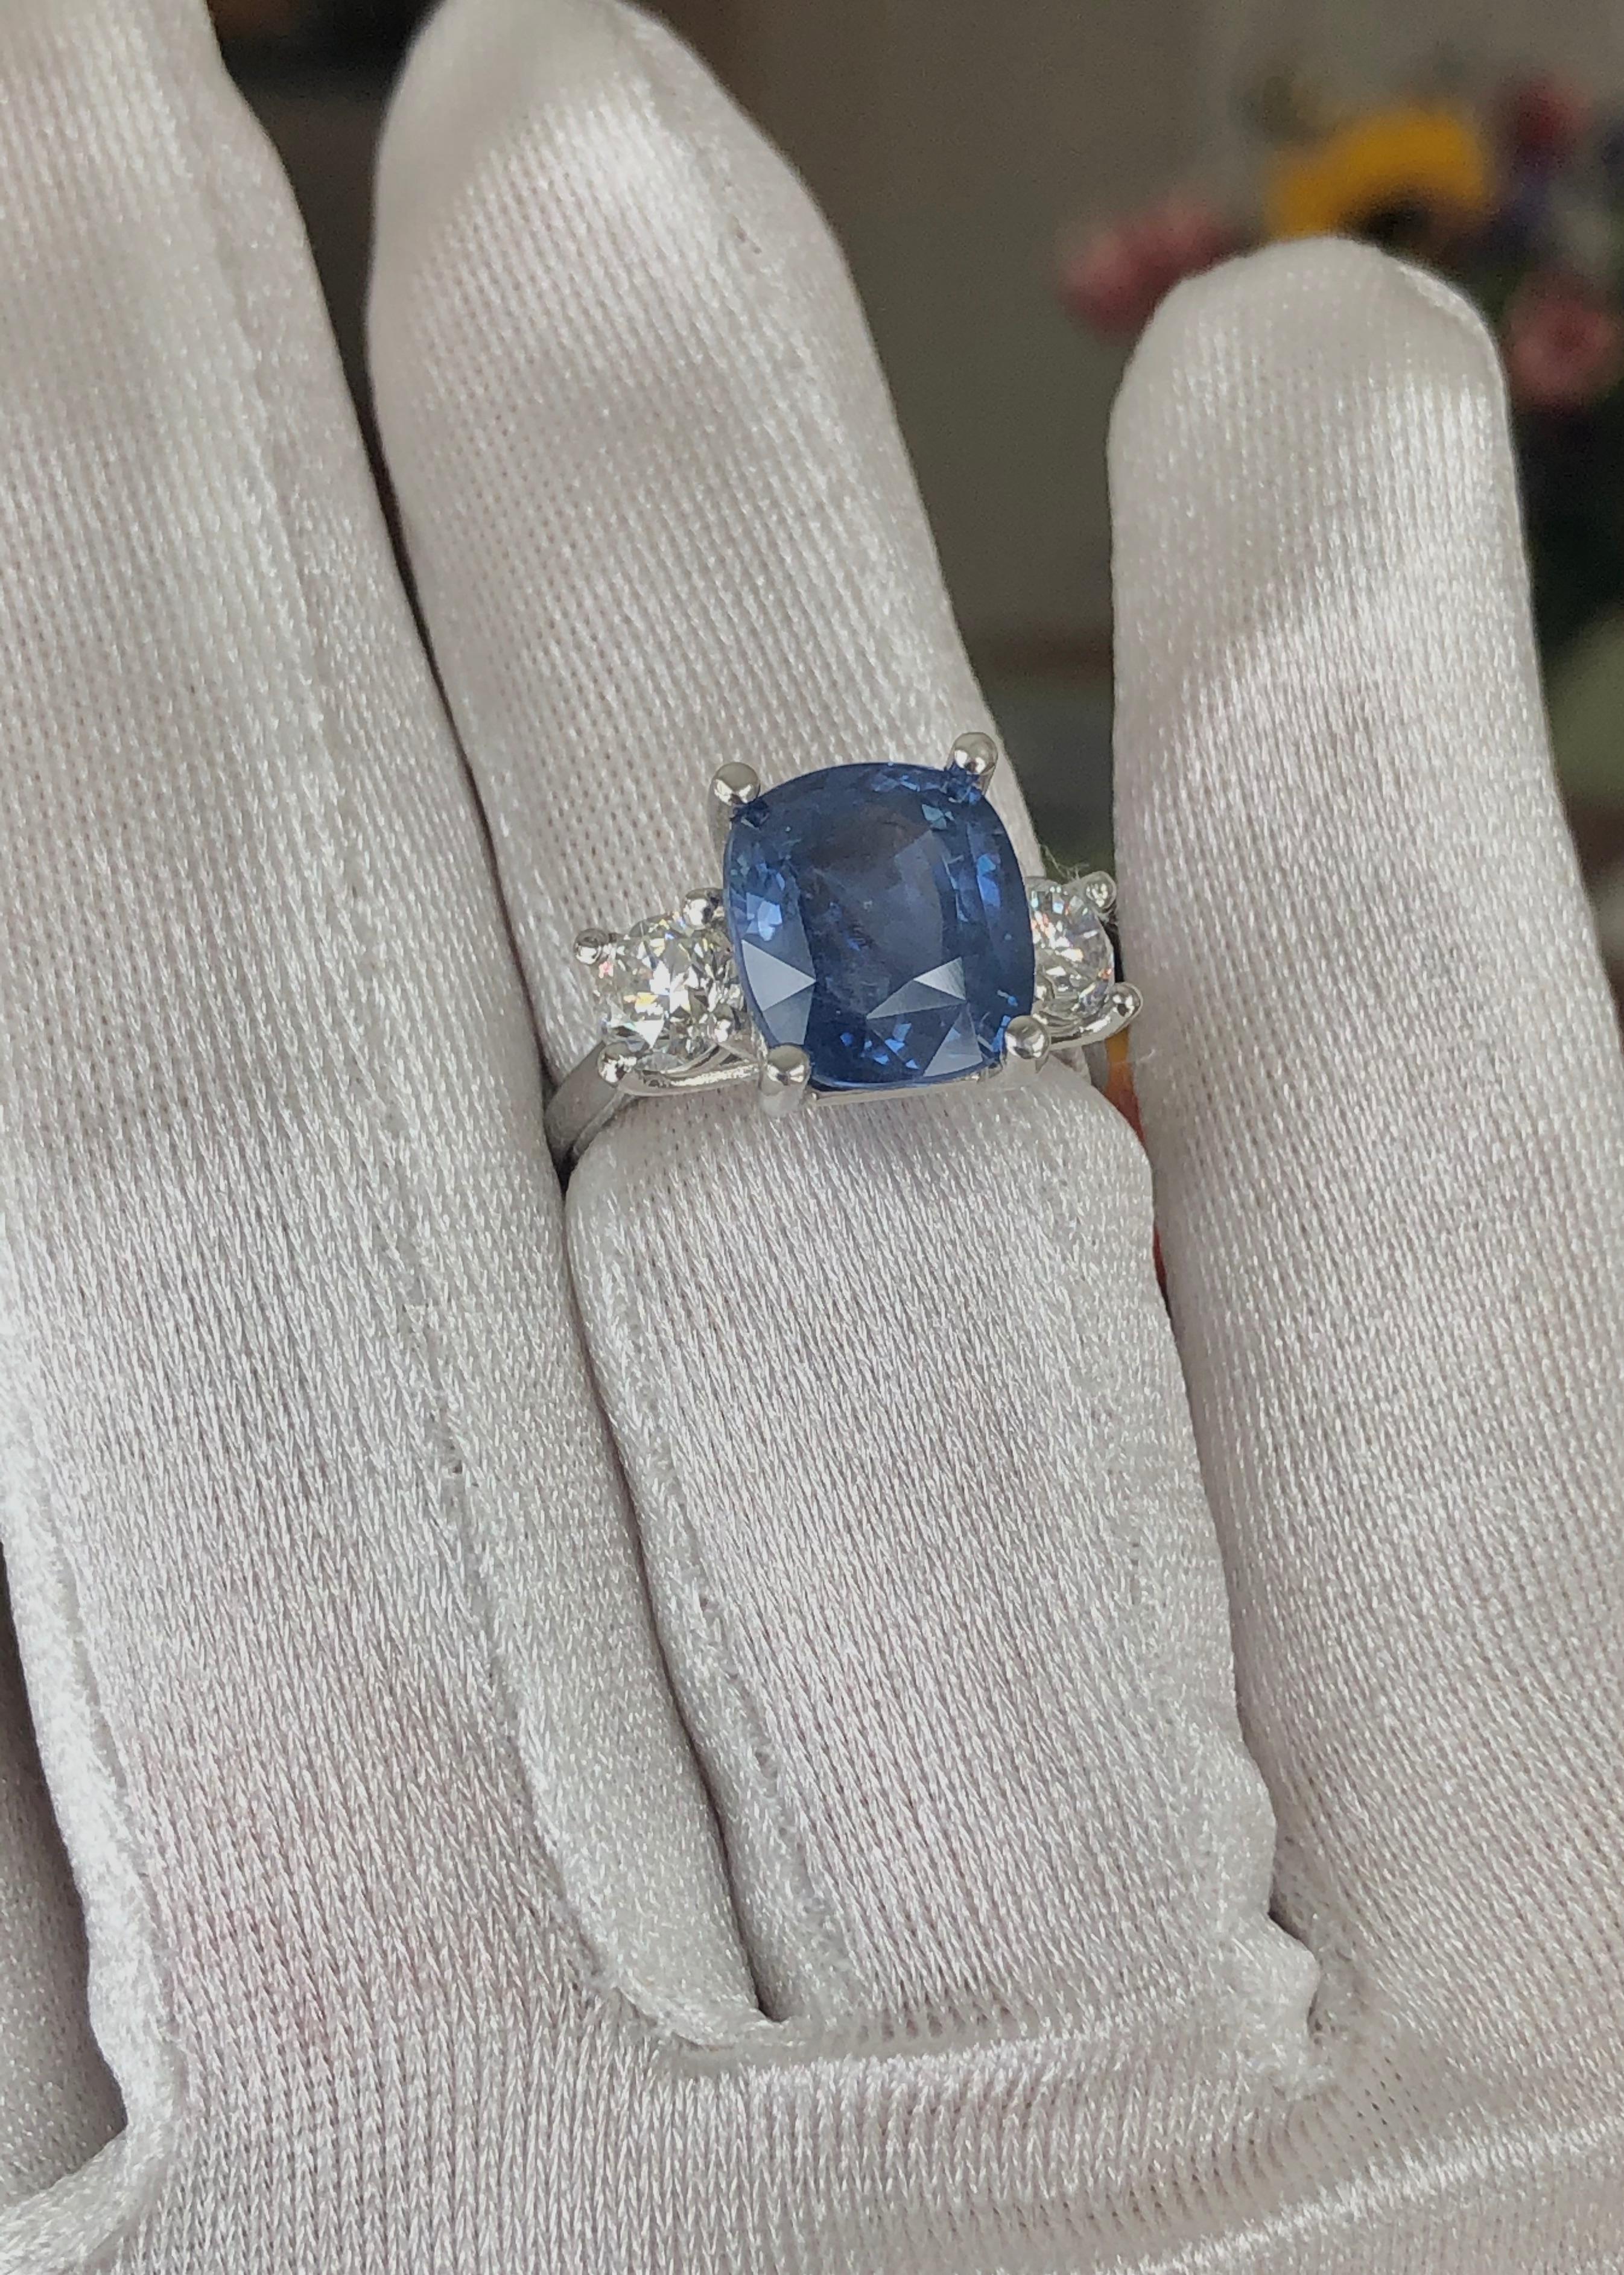 GIA Certified Unheated Natural Blue Sapphire and Diamond Engagement Ring Three Stone in Platinum.  
The cushion Ceylon blue natural sapphire weigh a total of 7.11 carats and two round brilliant cut diamonds weigh a total of 1.29 carats, G in color